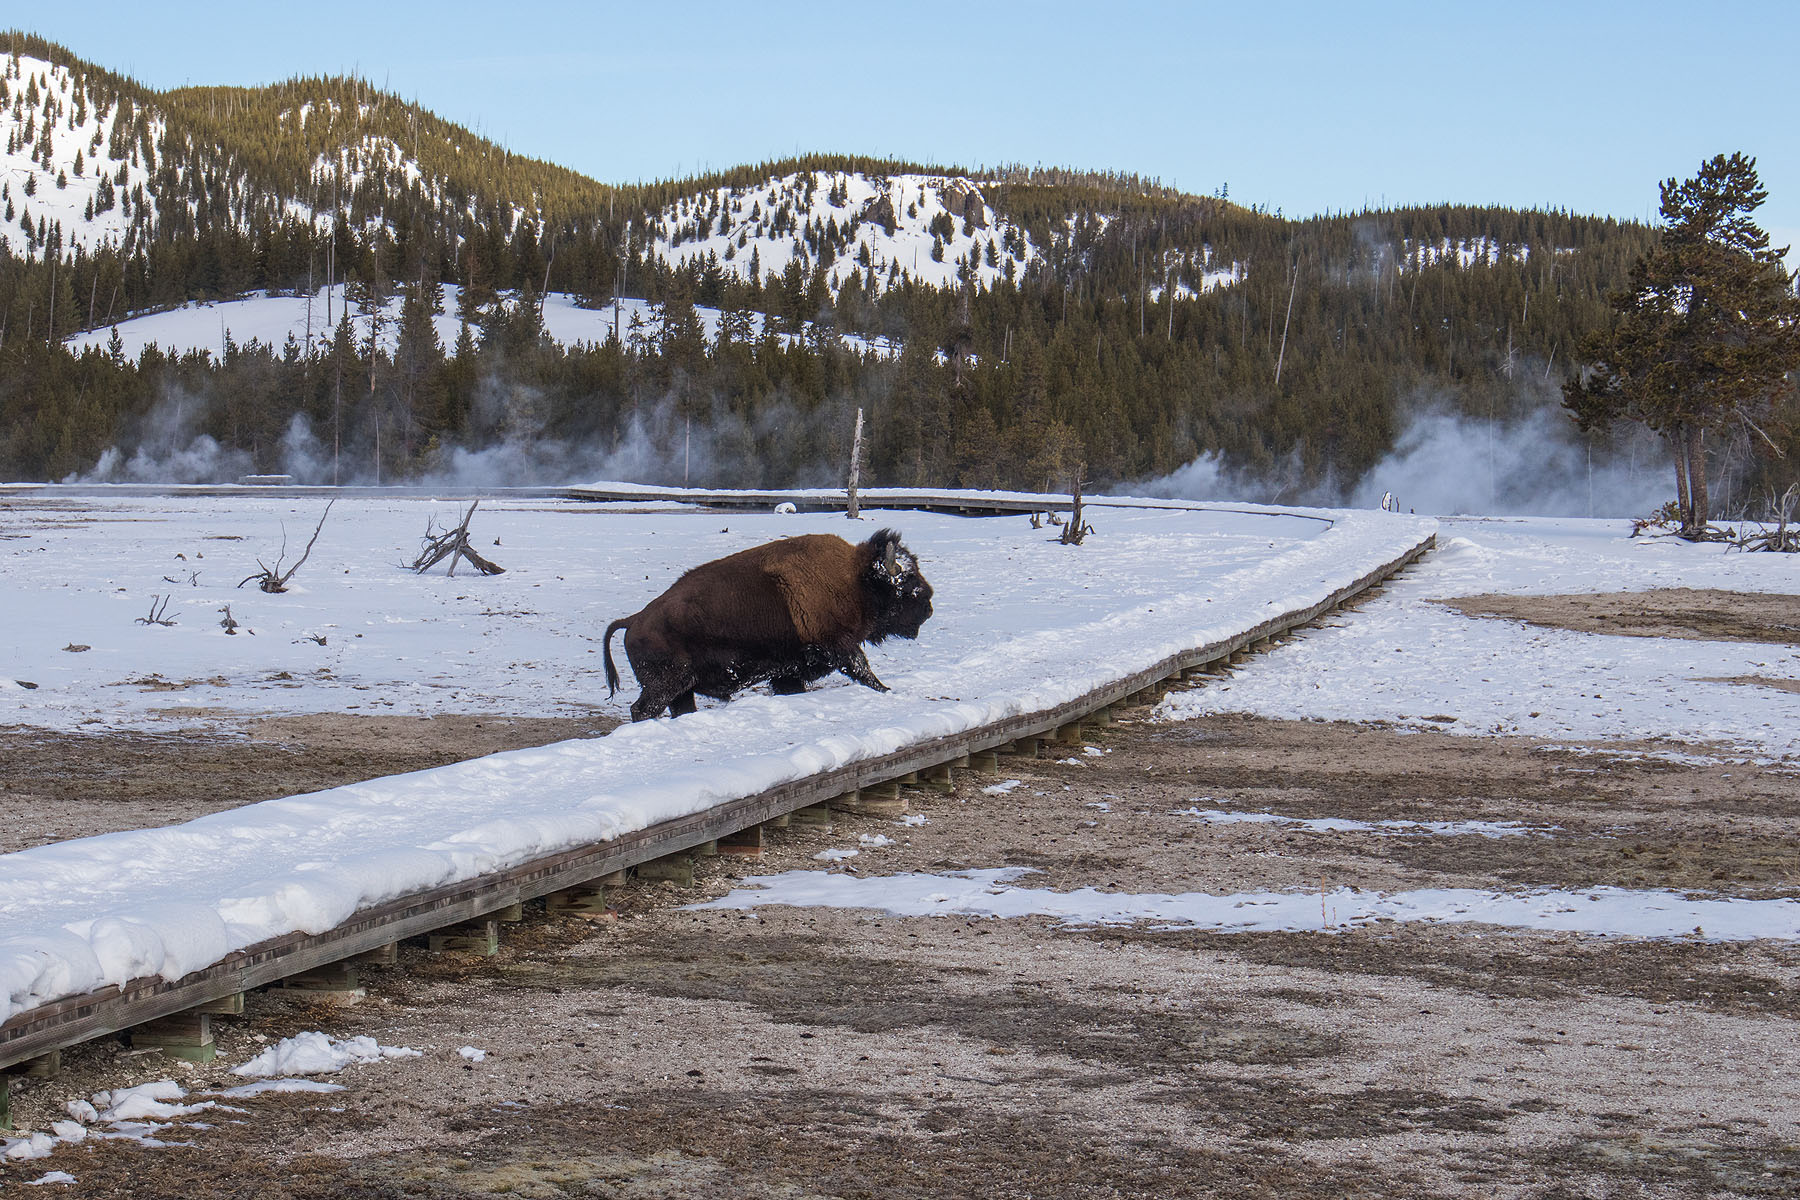 Bison crossing boardwalk in geyser field, January 2021.  Click for next photo.